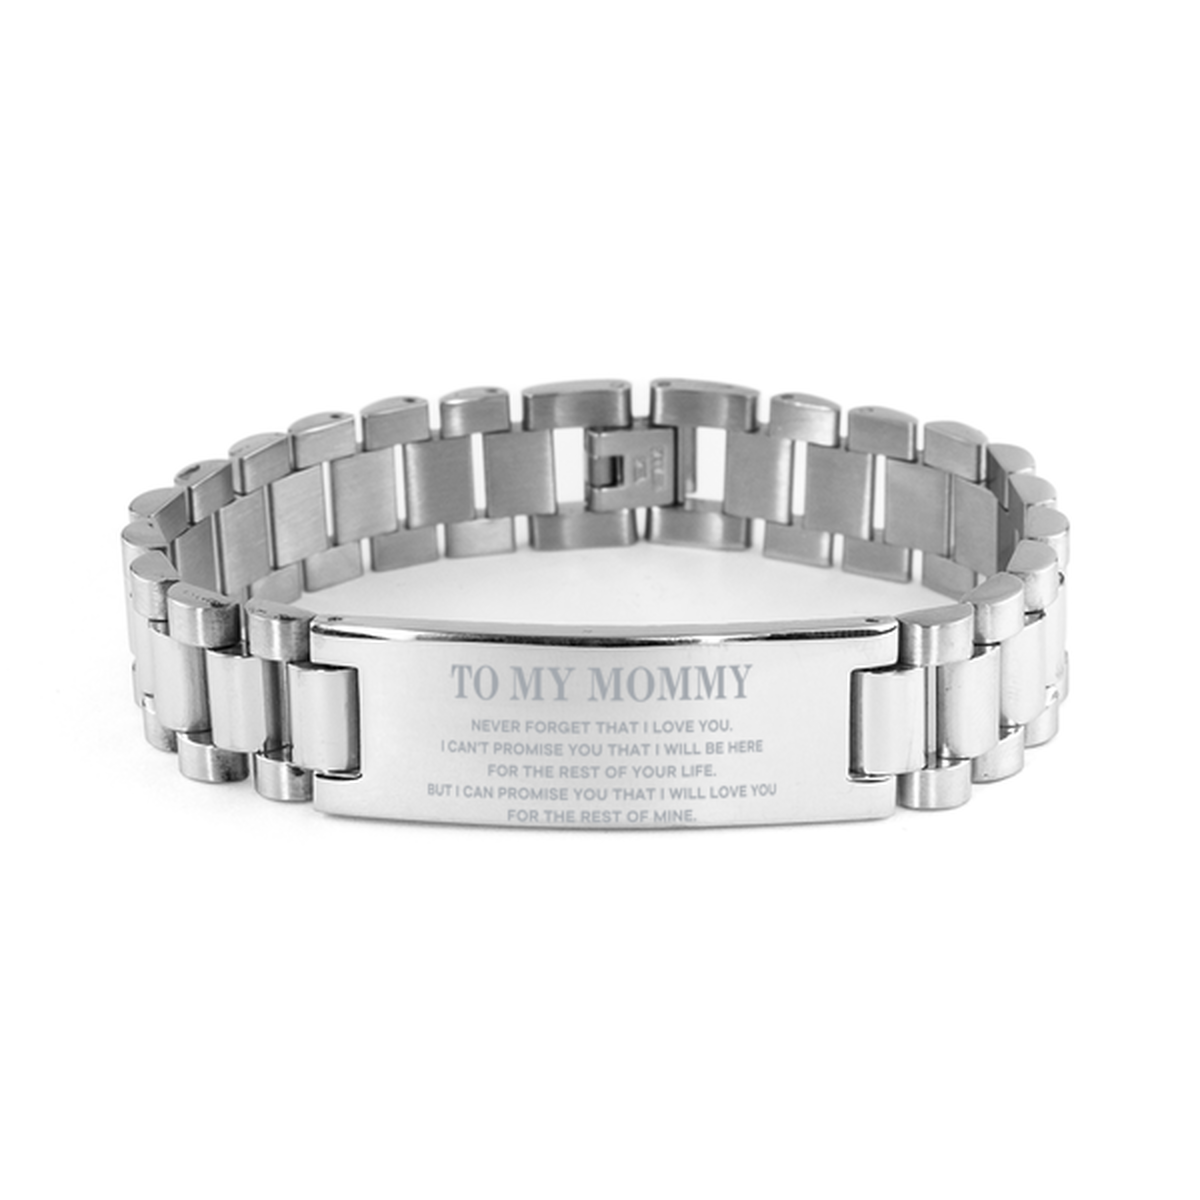 To My Mommy Gifts, I will love you for the rest of mine, Love Mommy Bracelet, Birthday Christmas Unique Ladder Stainless Steel Bracelet For Mommy